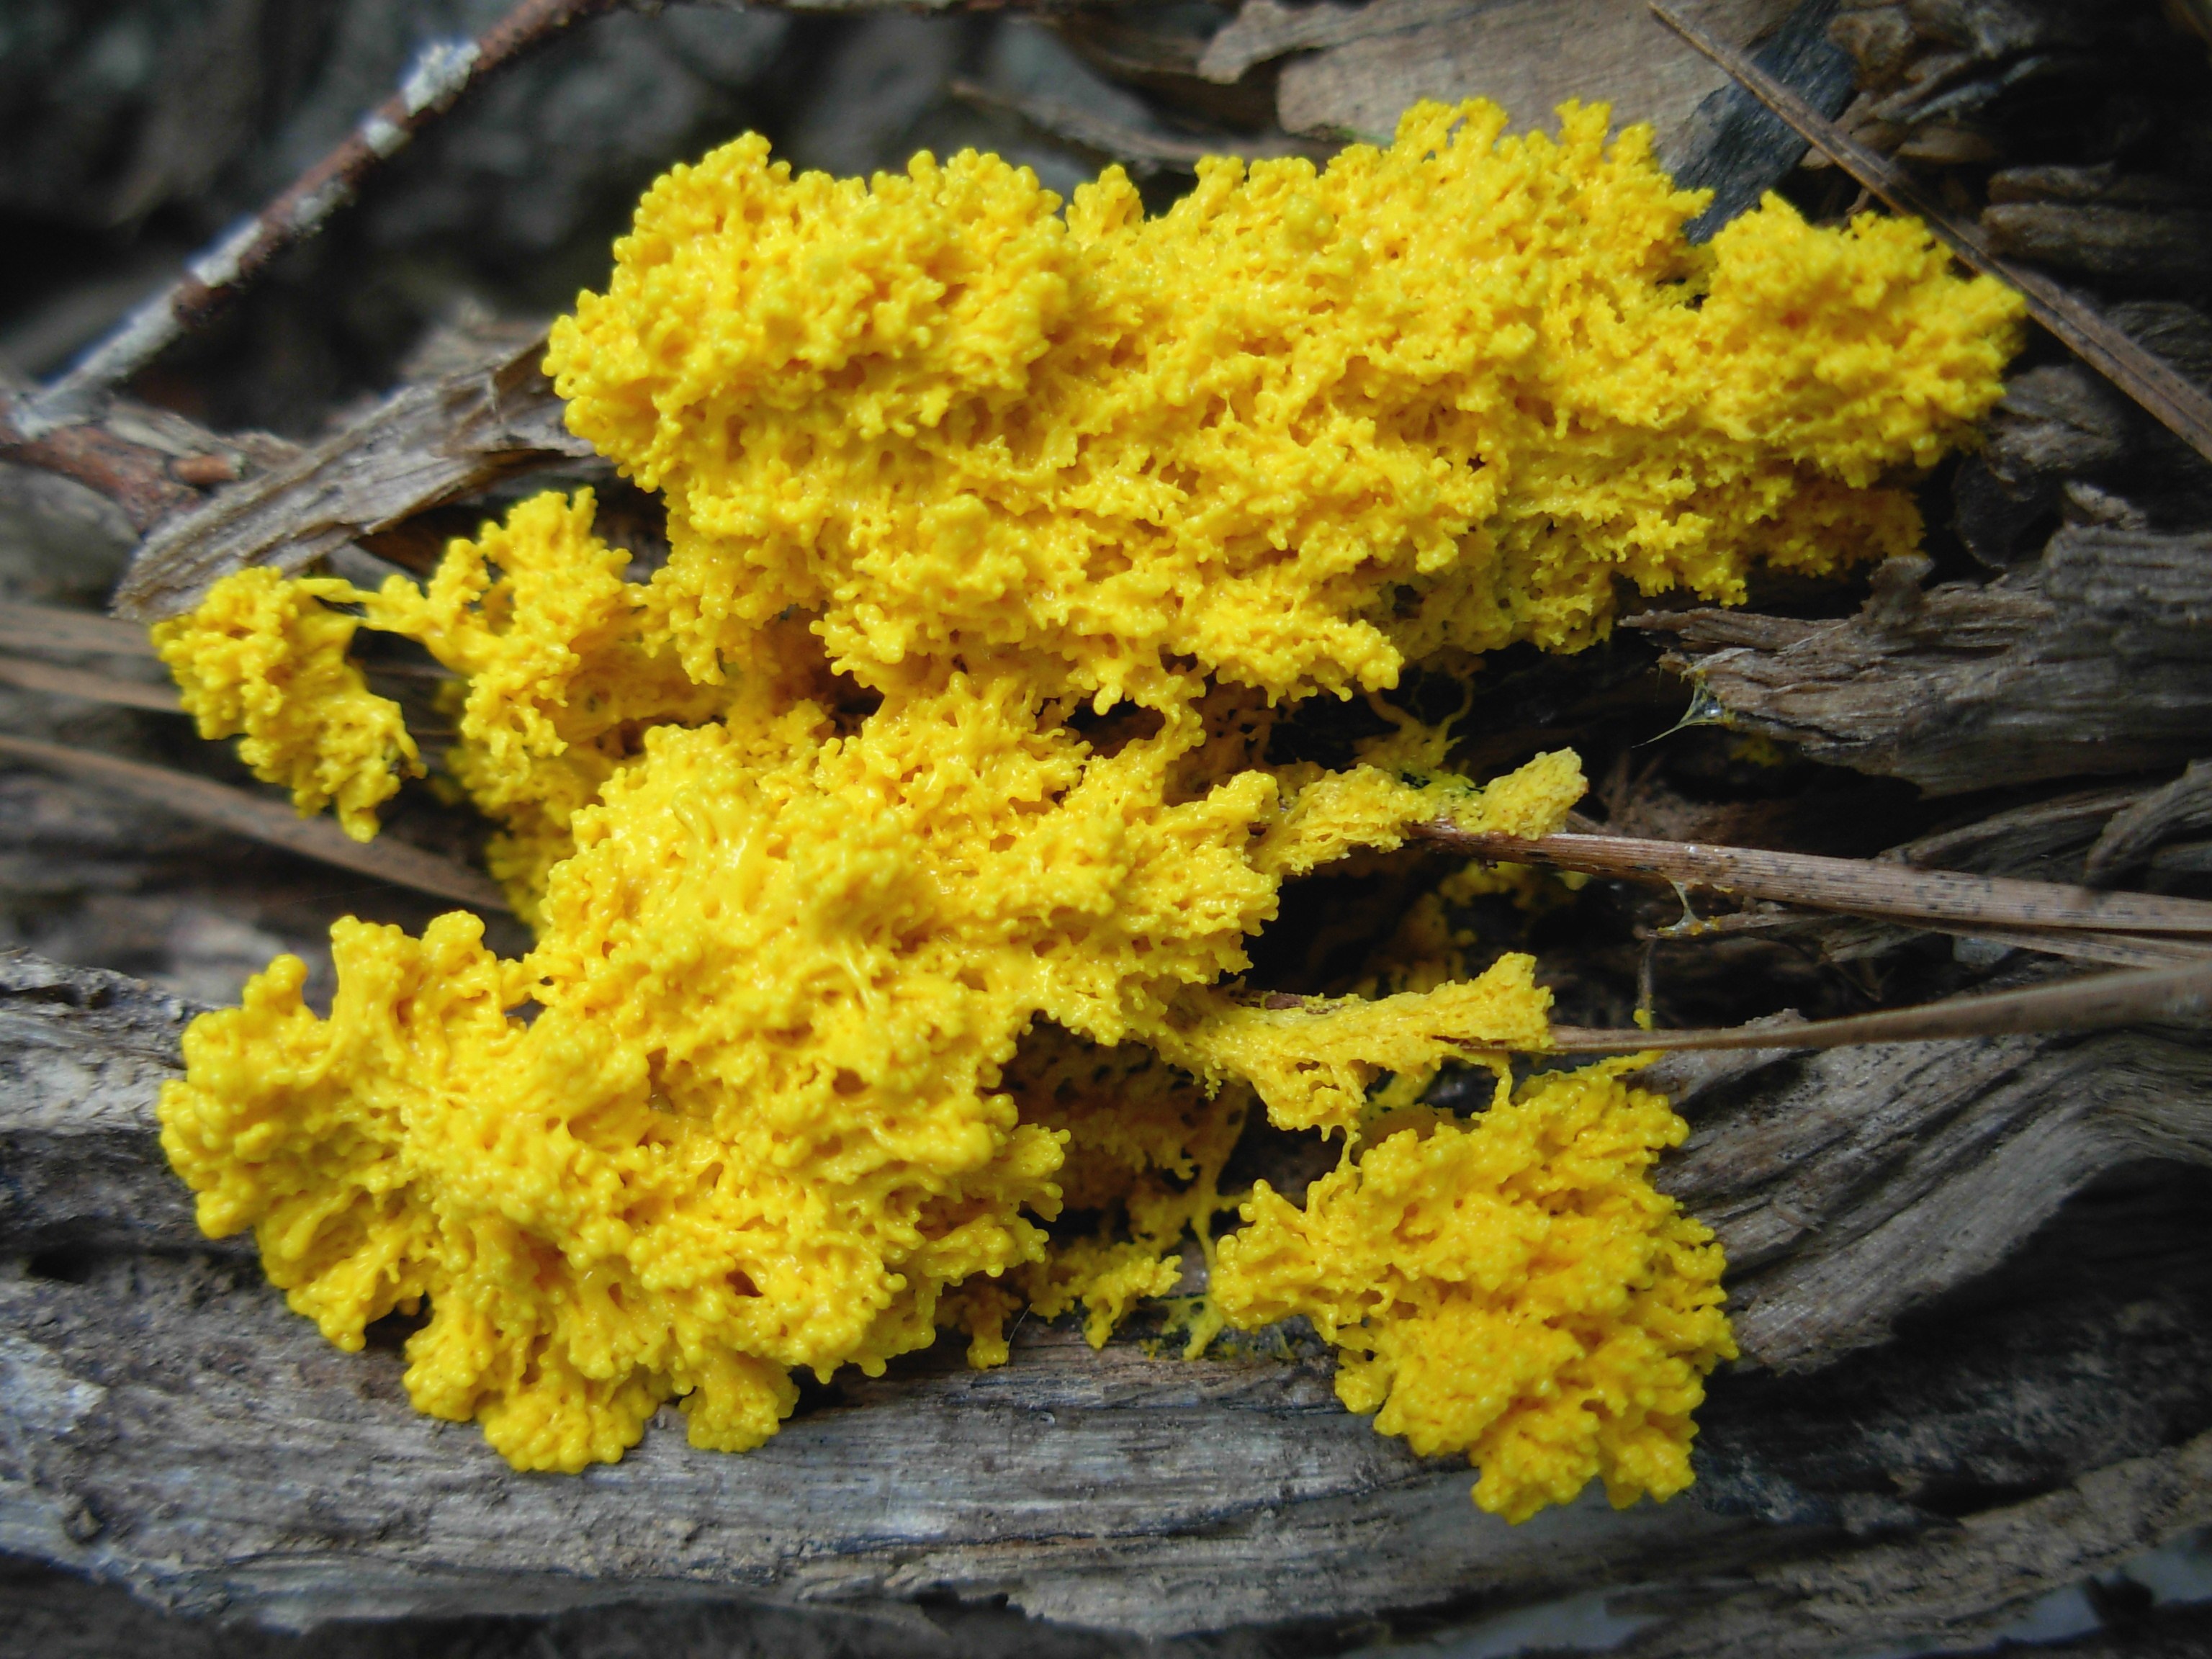 Slime mold image By Lawrence Durell Wade, M.D. (Own work) [CC-BY-SA-3.0 (http://creativecommons.org/licenses/by-sa/3.0)], via Wikimedia Commons